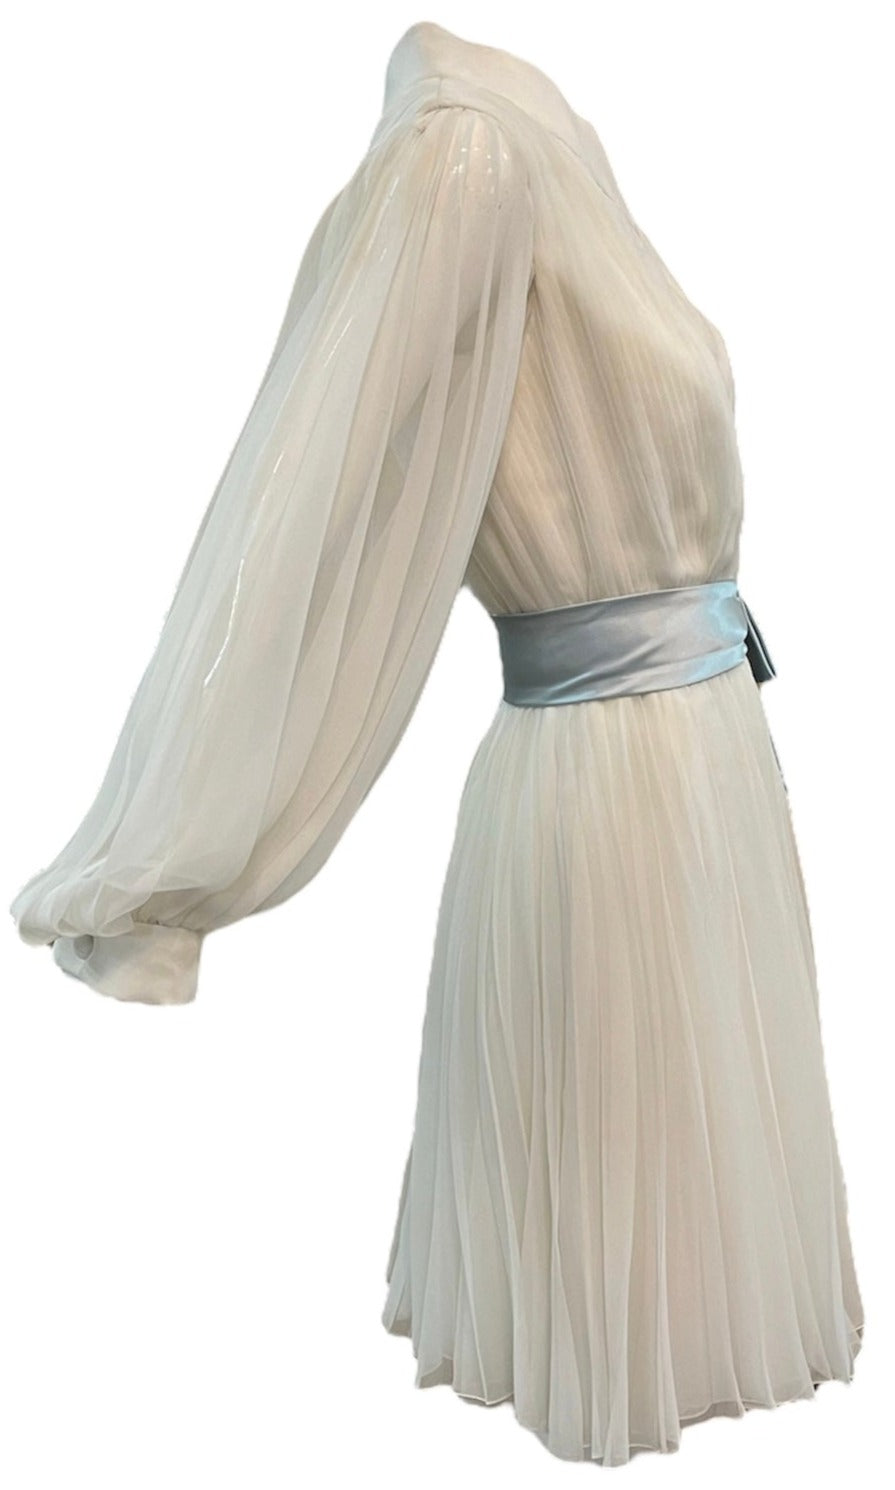   William Travilla 60s White Poly Chiffon Pleated Party Dress SIDE 2 of 5